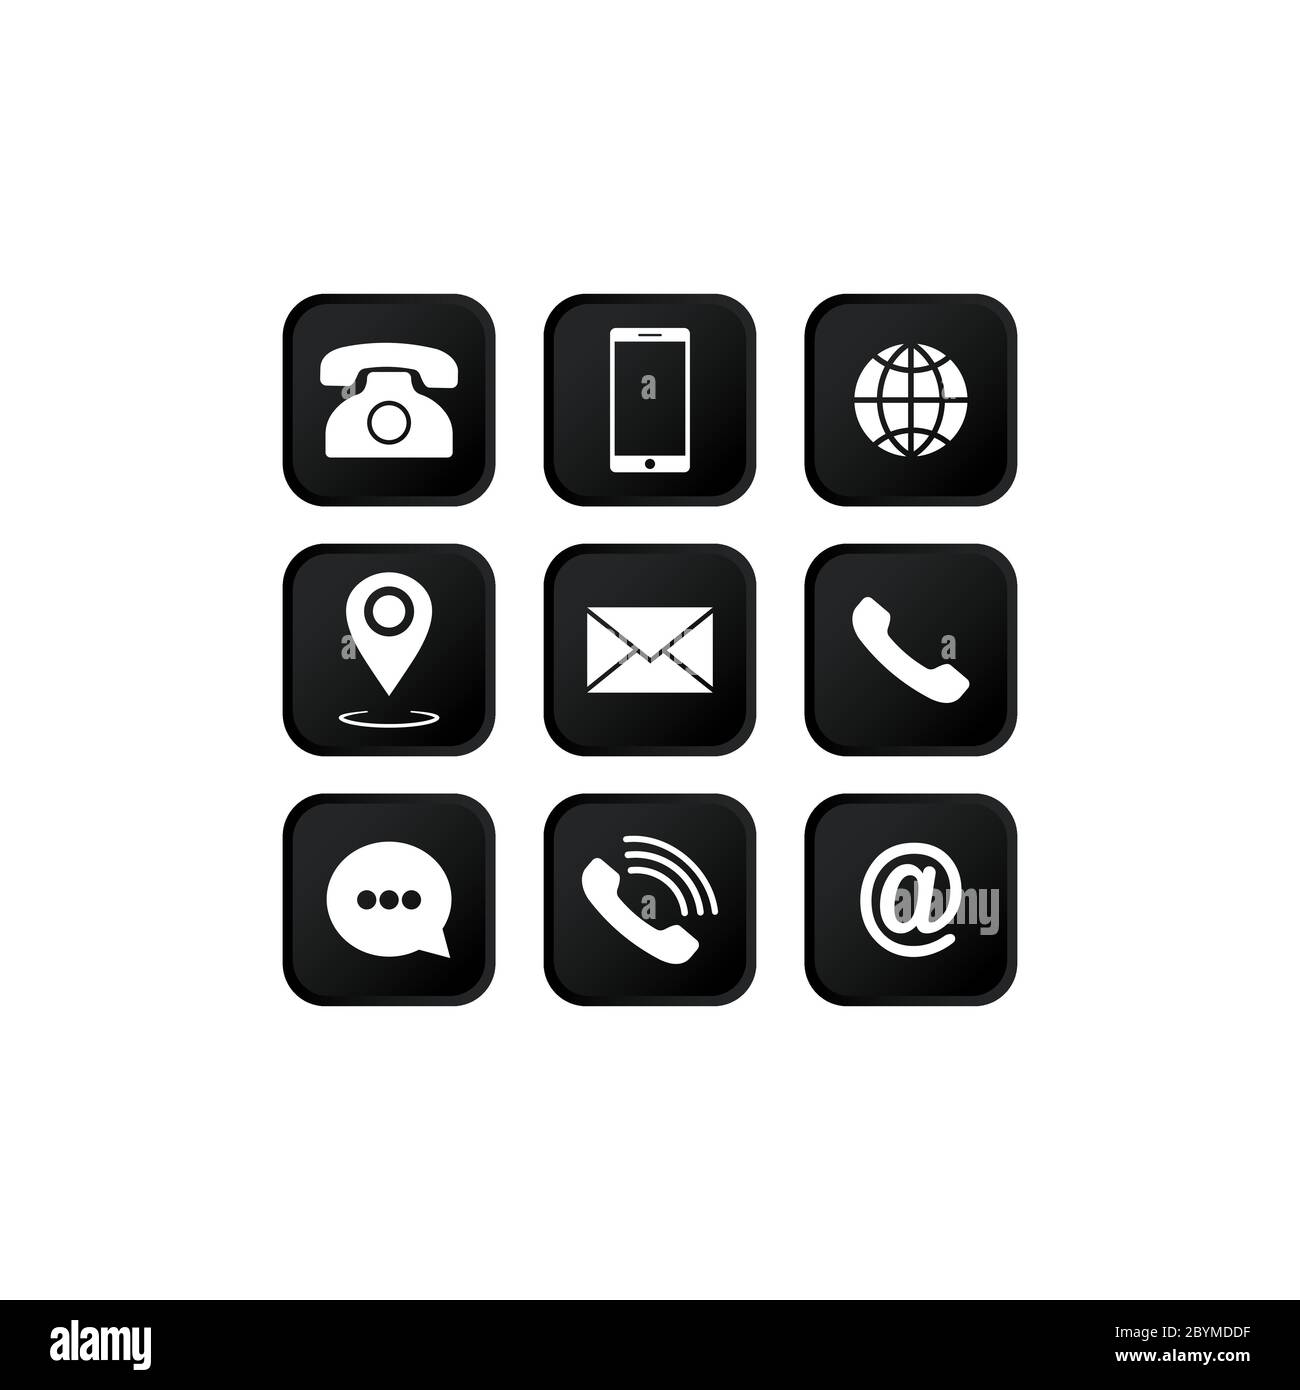 Set of communication icons set. Phone, mobile phone, retro phone, location, mail and web site symbols on isolated white background for applications Stock Vector